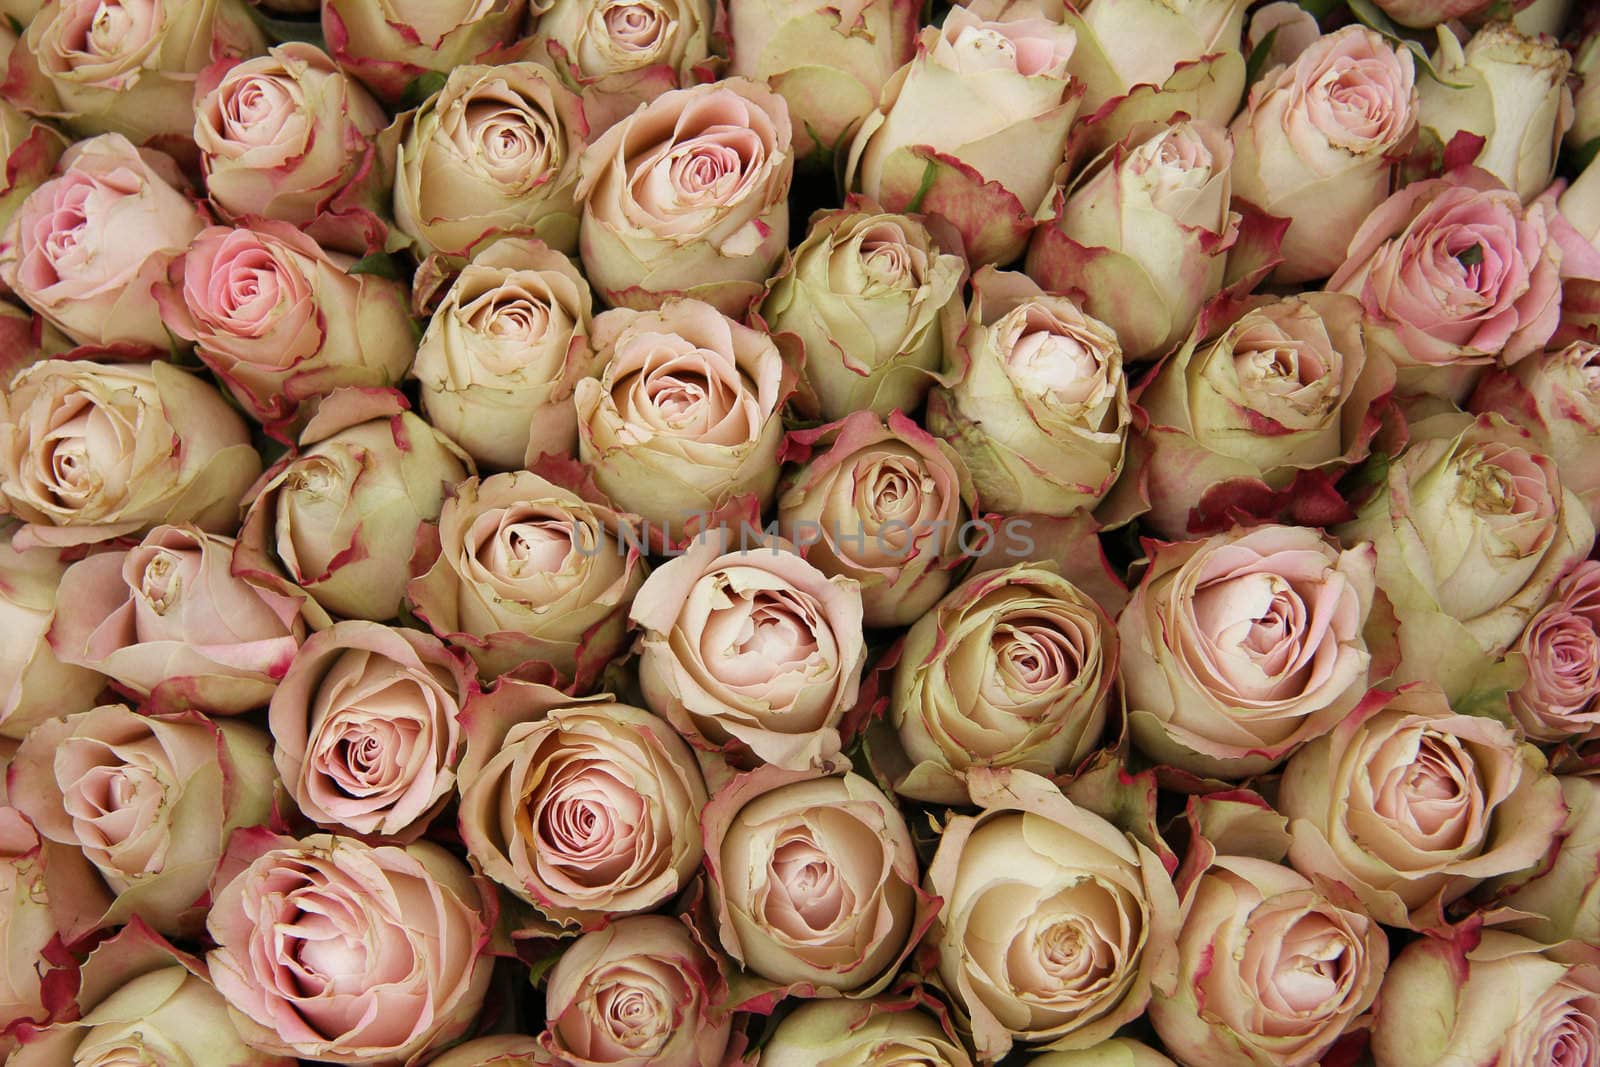 Pale pink rose buds with a touch of red in a wedding centerpiece